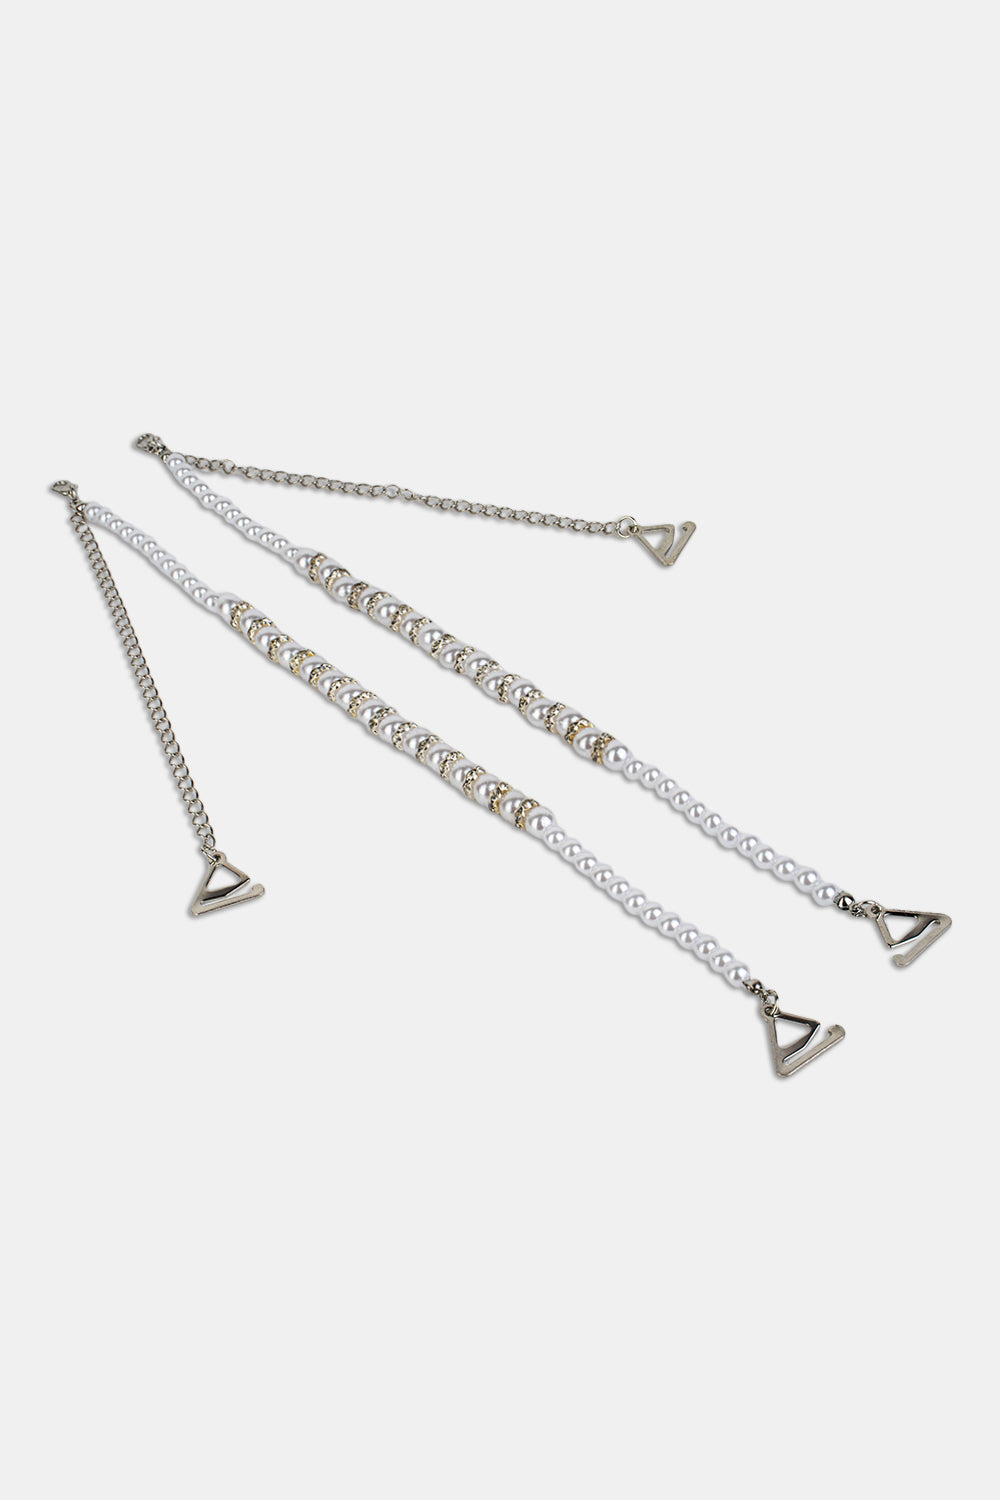 Decorative metal bra straps with white crystals